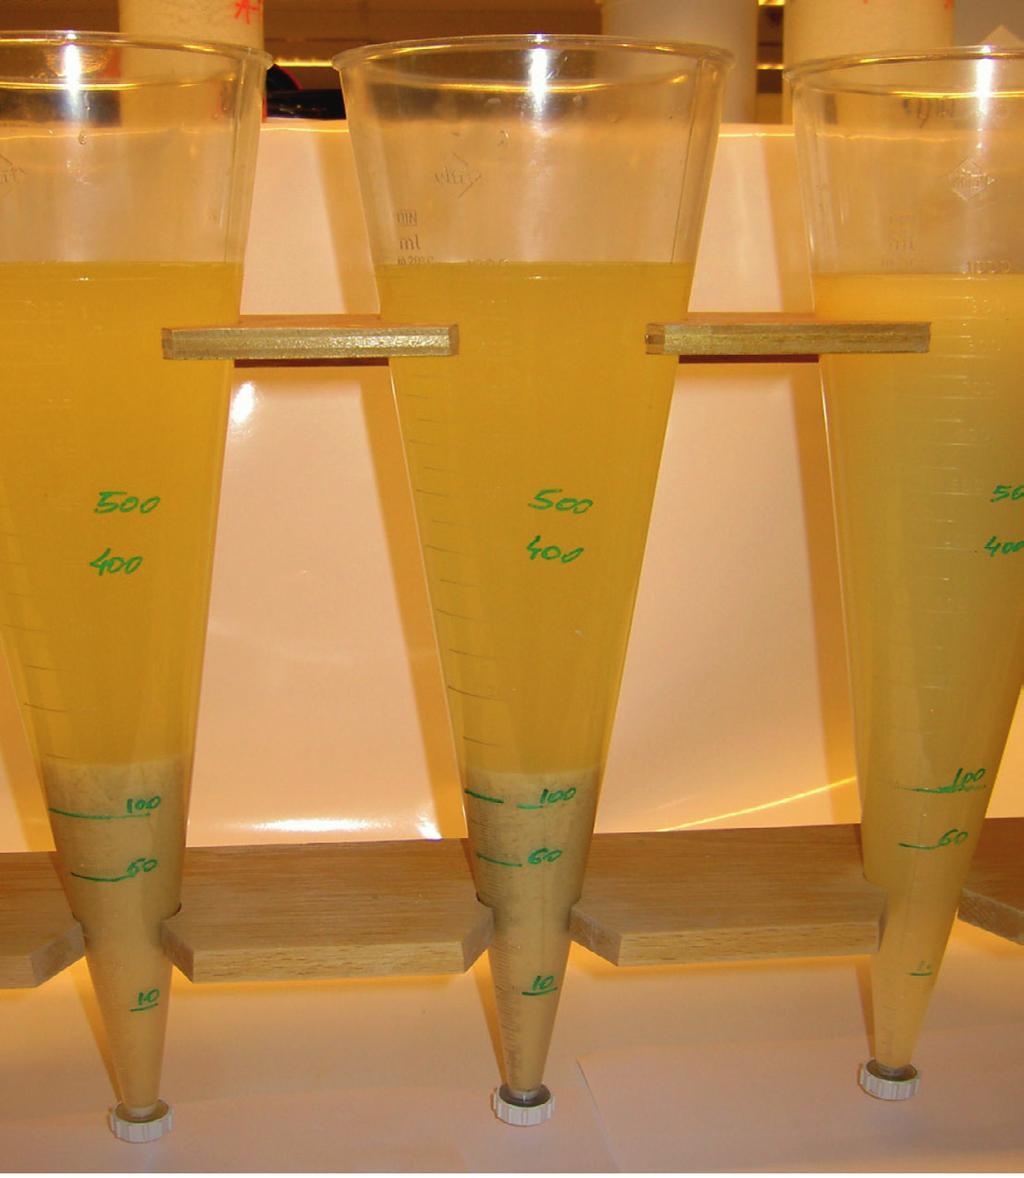 Gelatine Using gelatine for clarification Flocculation with gelatine Bindzil, Levasil and Bevasil flocculate well with all the commonly available qualities of gelatine.